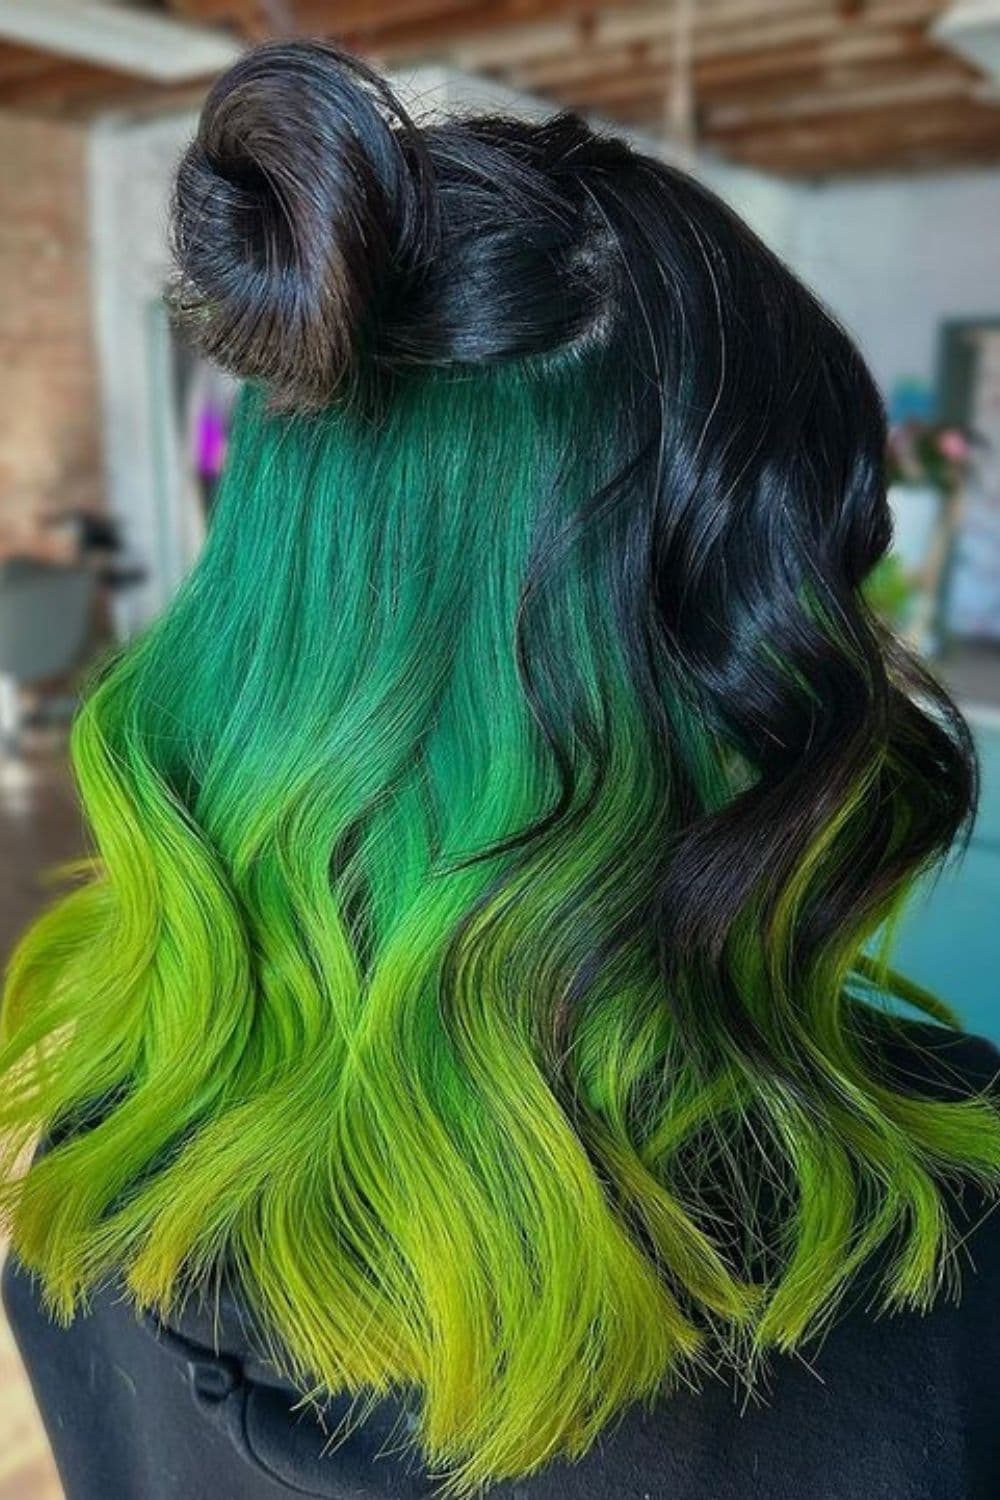 A woman with a half-up half-down green ombre hair.